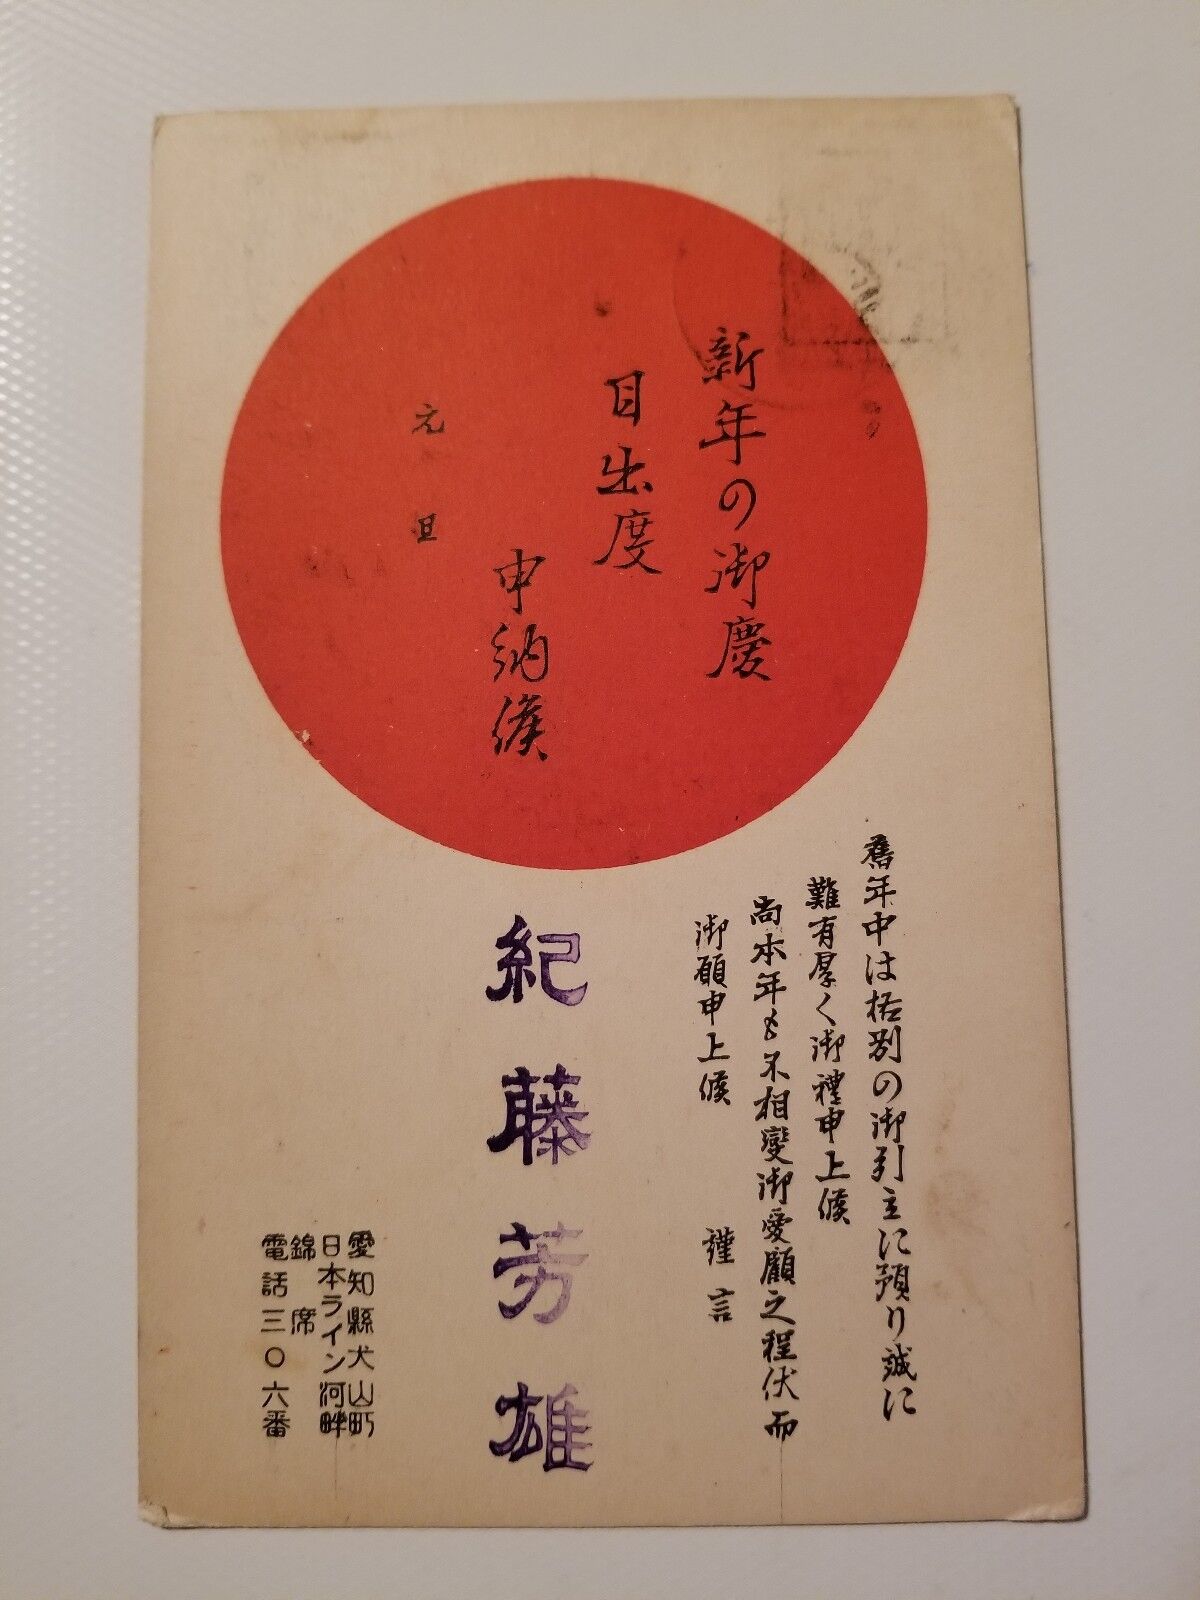 Vintage Antique Japanese Postcard Postmarked With Stamp Rising Sun Collectible